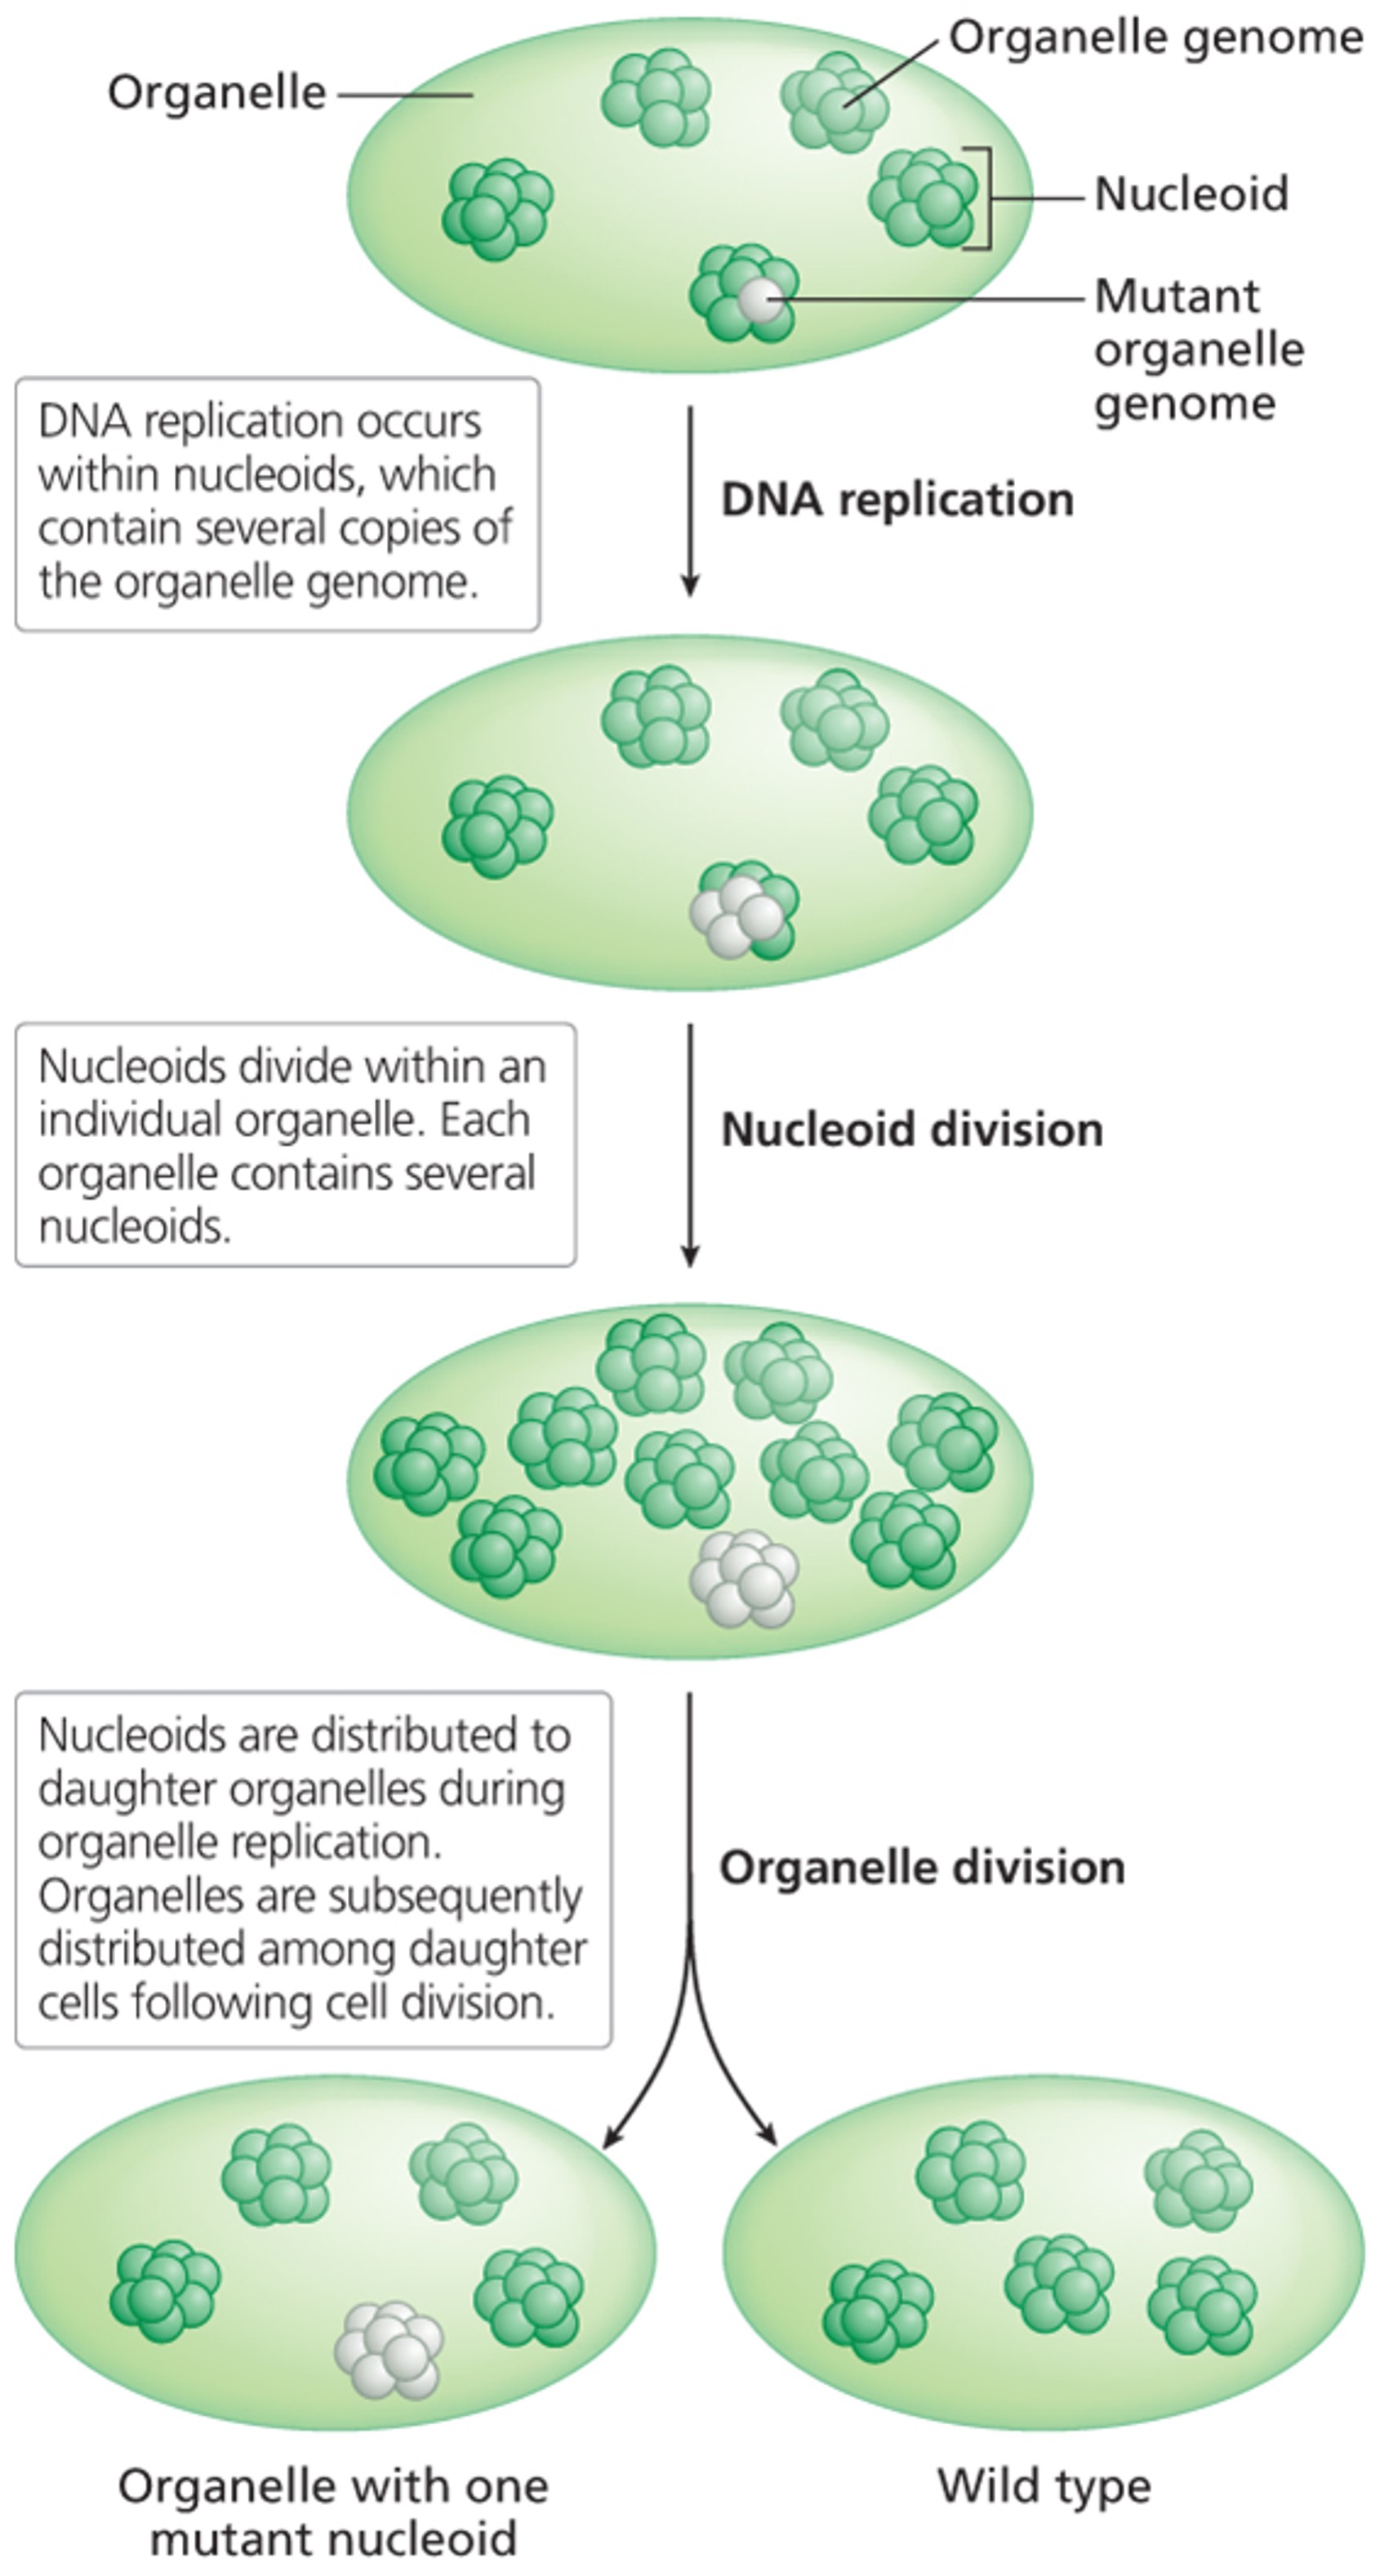 Factors in replication of organelle genomes